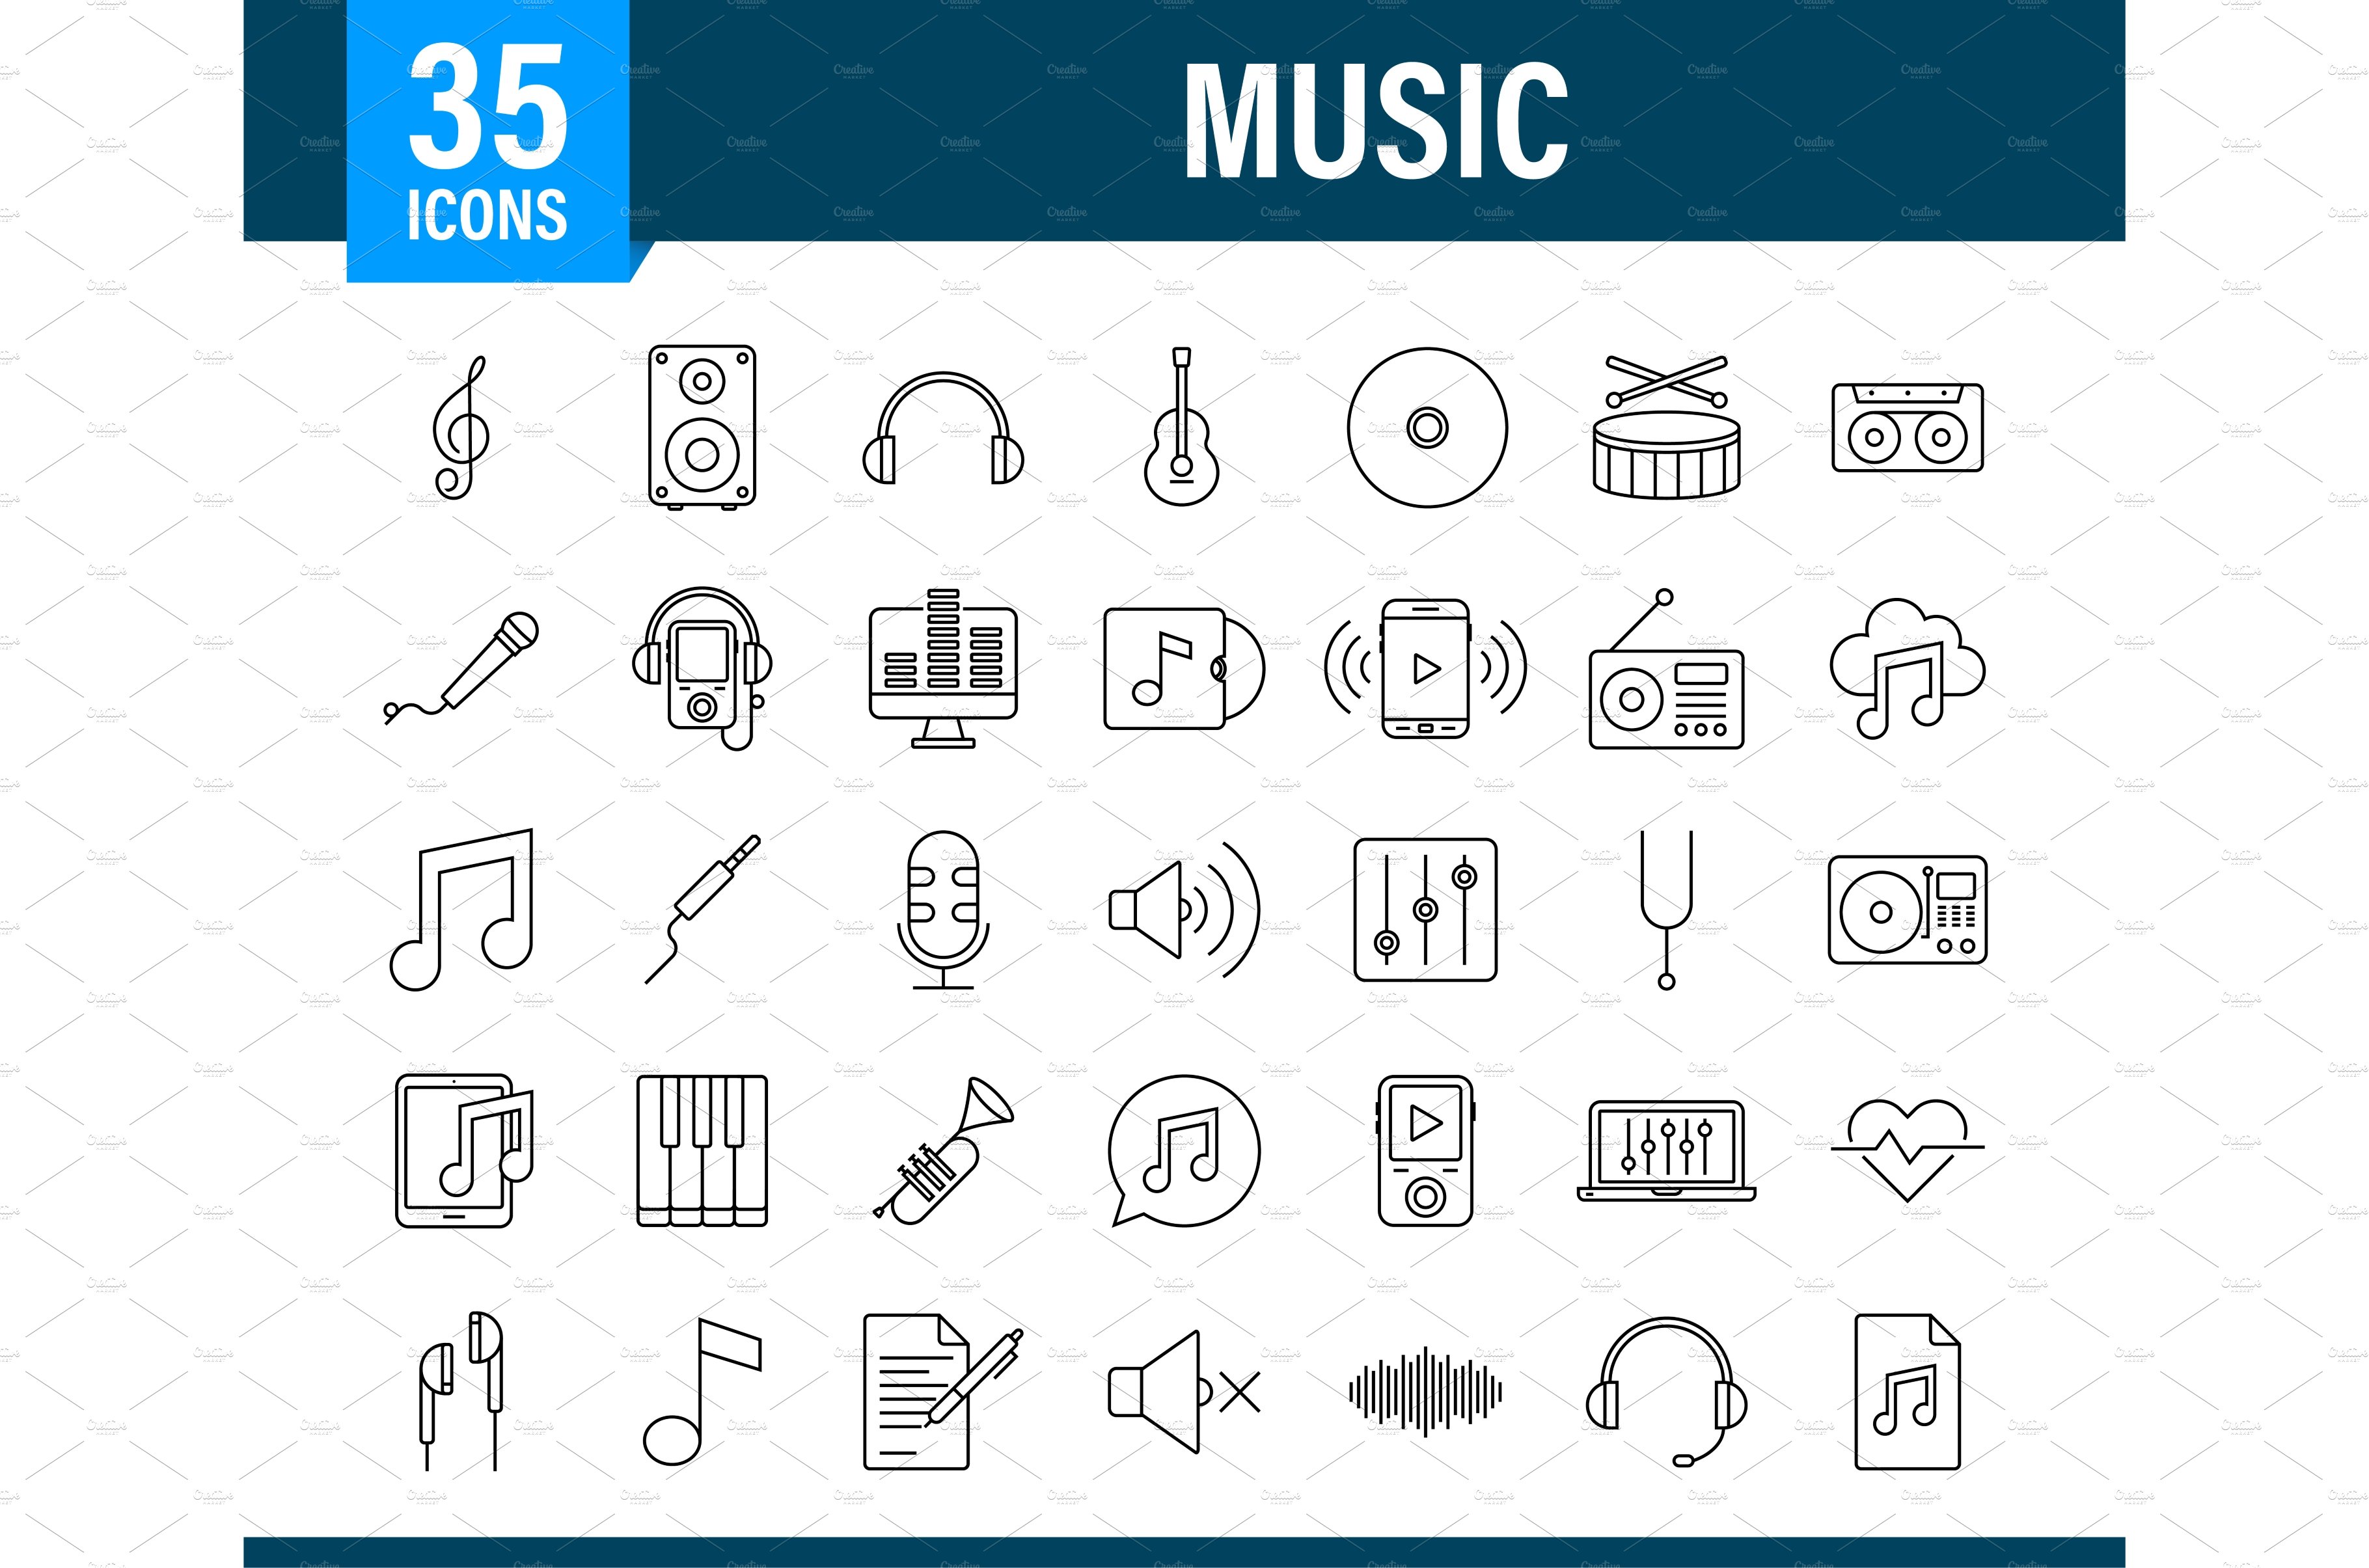 Music icon in flat style. Music cover image.